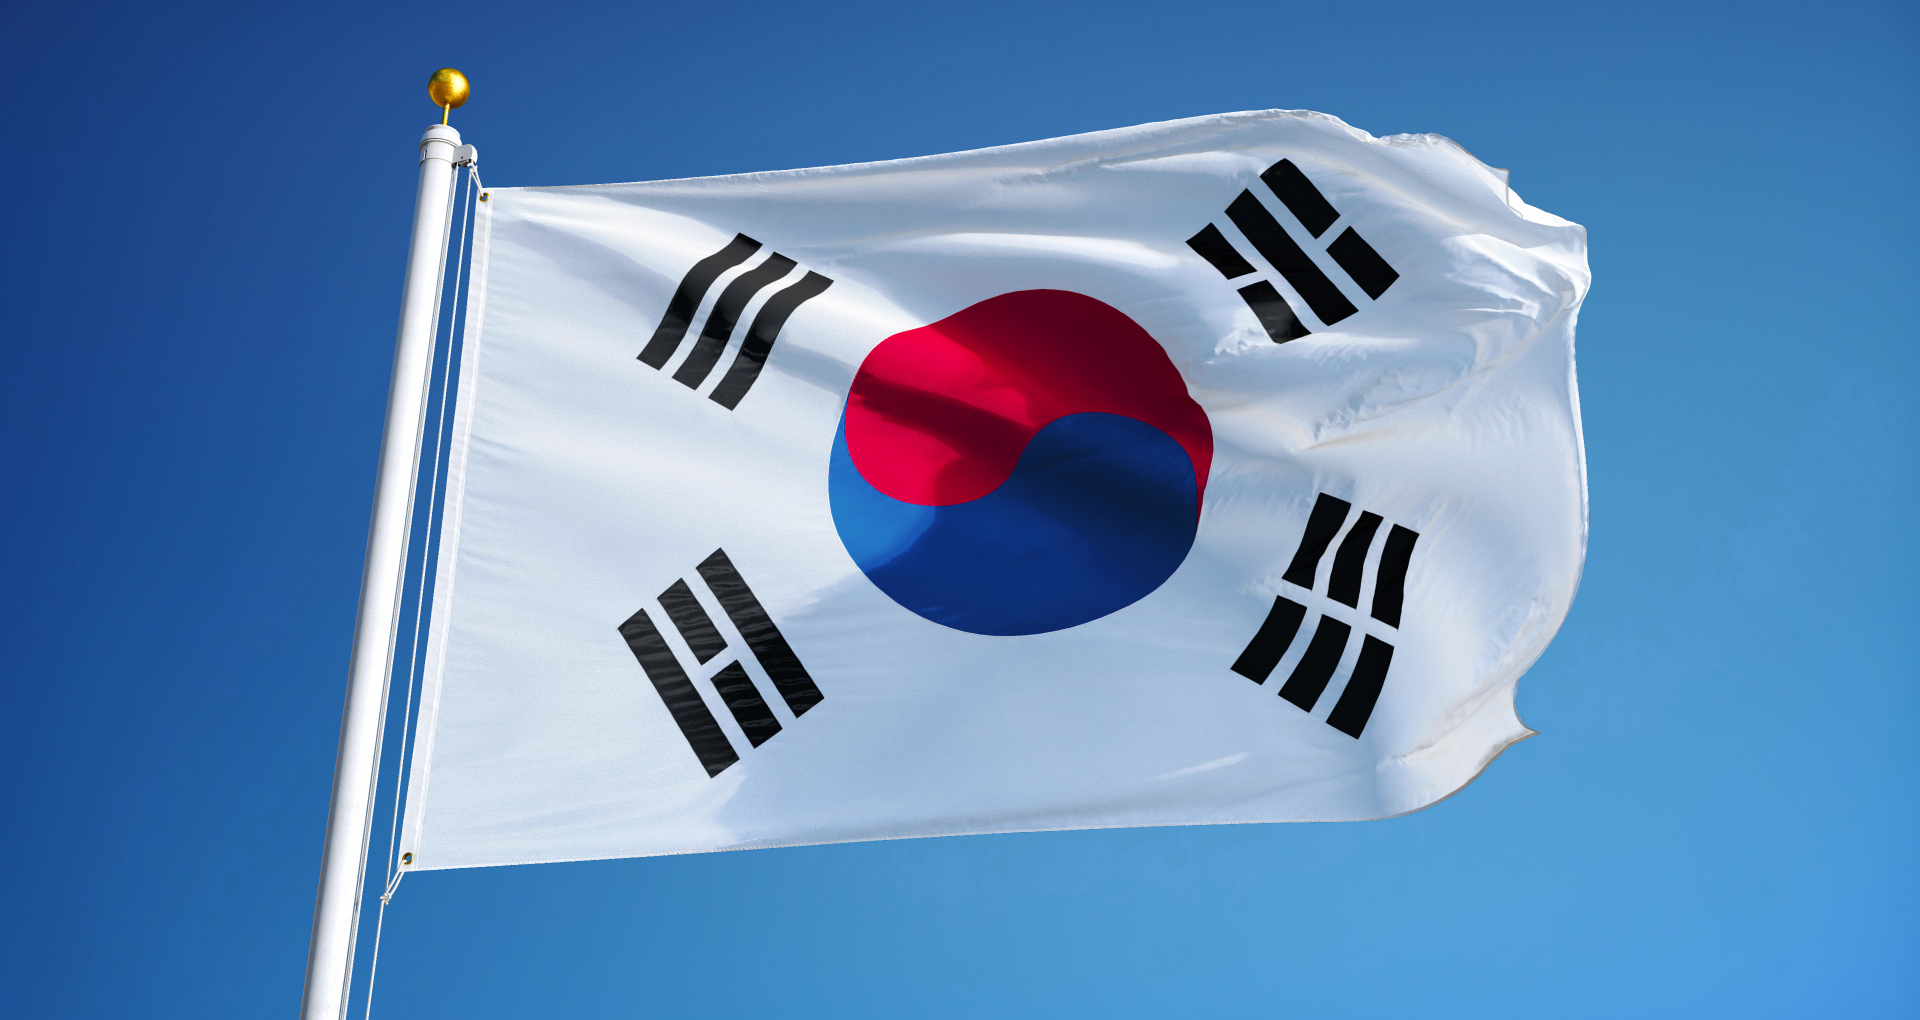 South Korea Court Rules LUNC Is Not a Security